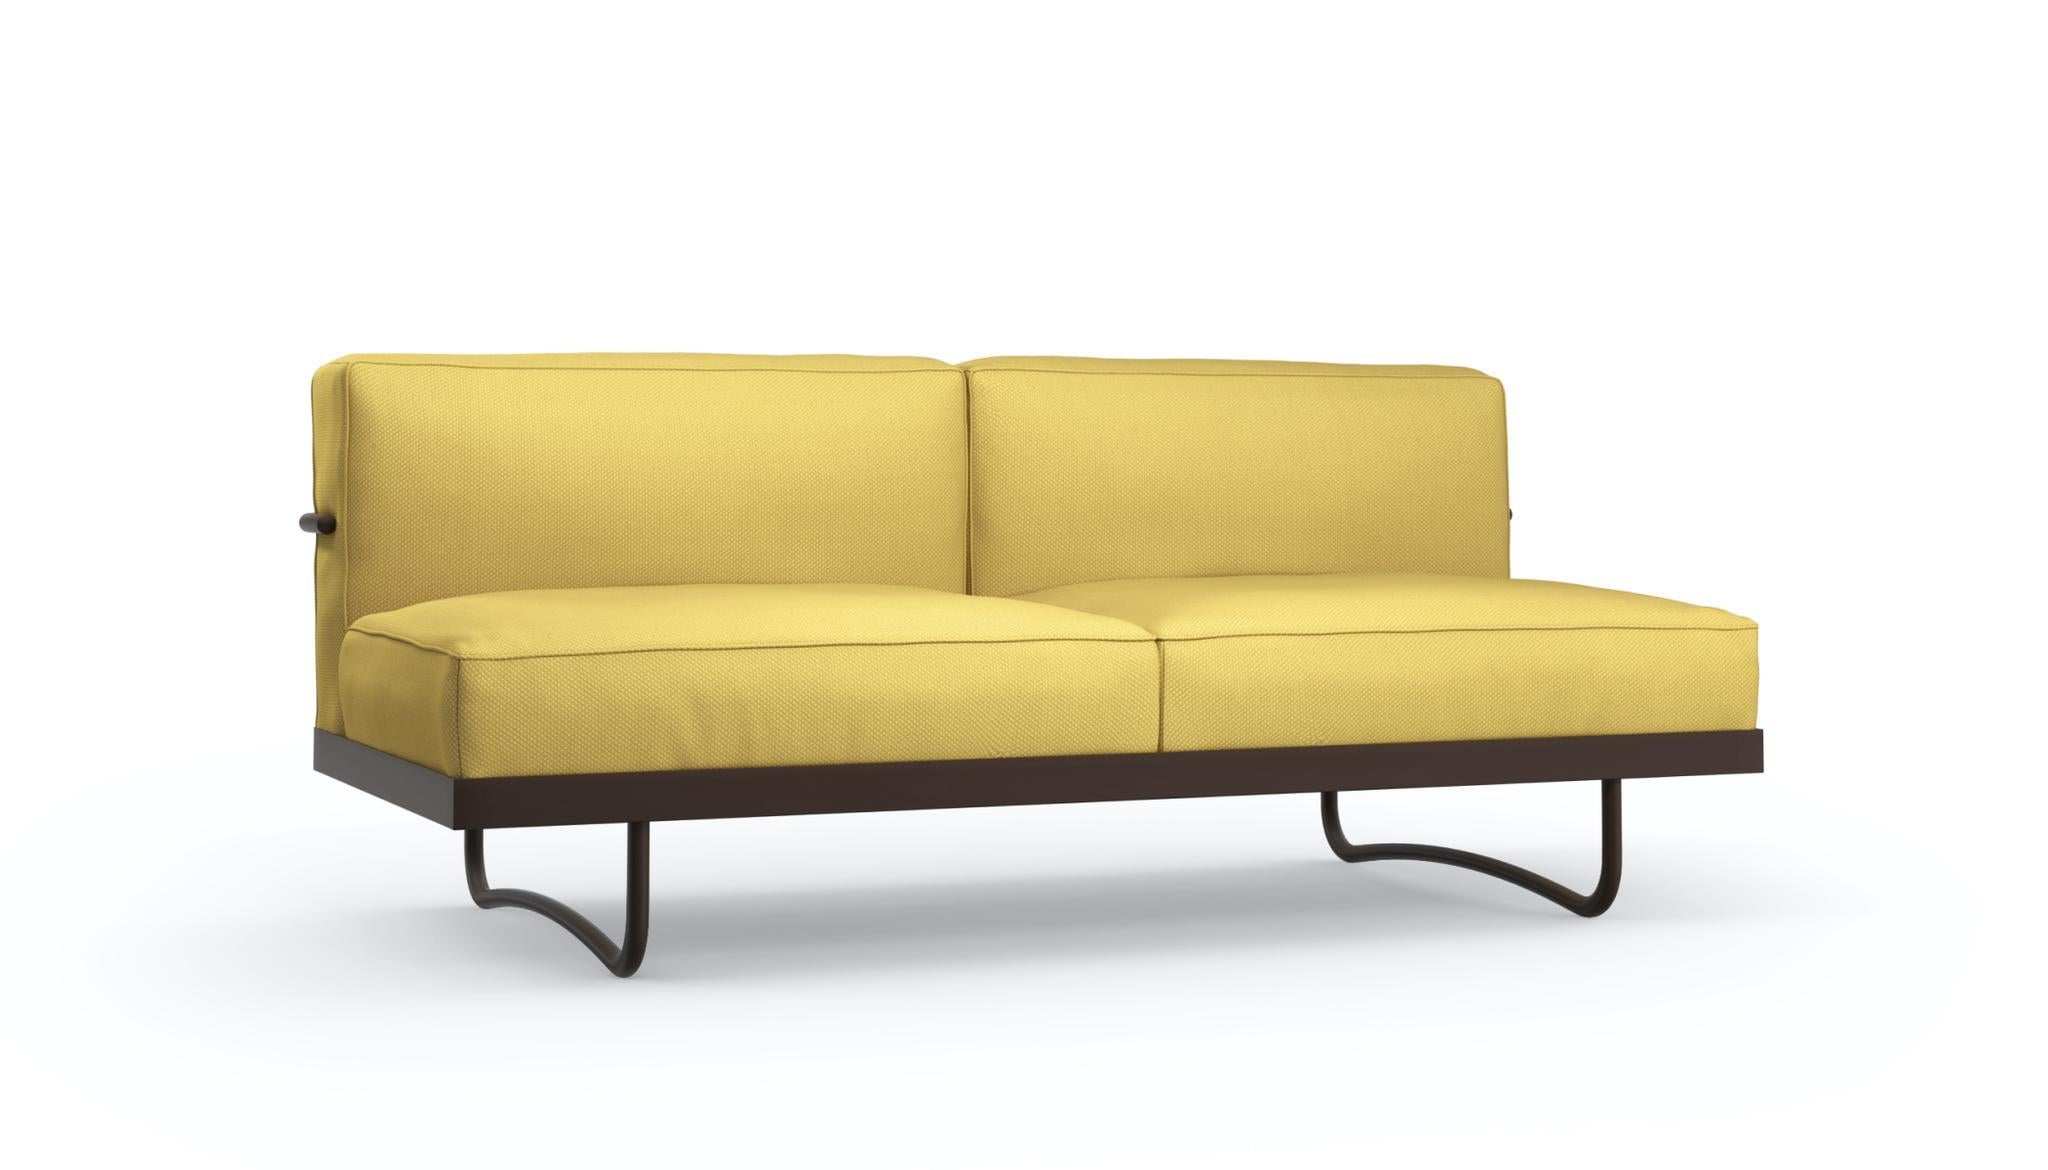 Sofa designed by Le Corbusier, Pierre Jeanneret, Charlotte Perriand in 1934. Relaunched by Cassina in 2014. Manufactured by Cassina in Italy.

Contemporary and comfortable lines for this sofa that was designed by Le Corbusier for his Paris